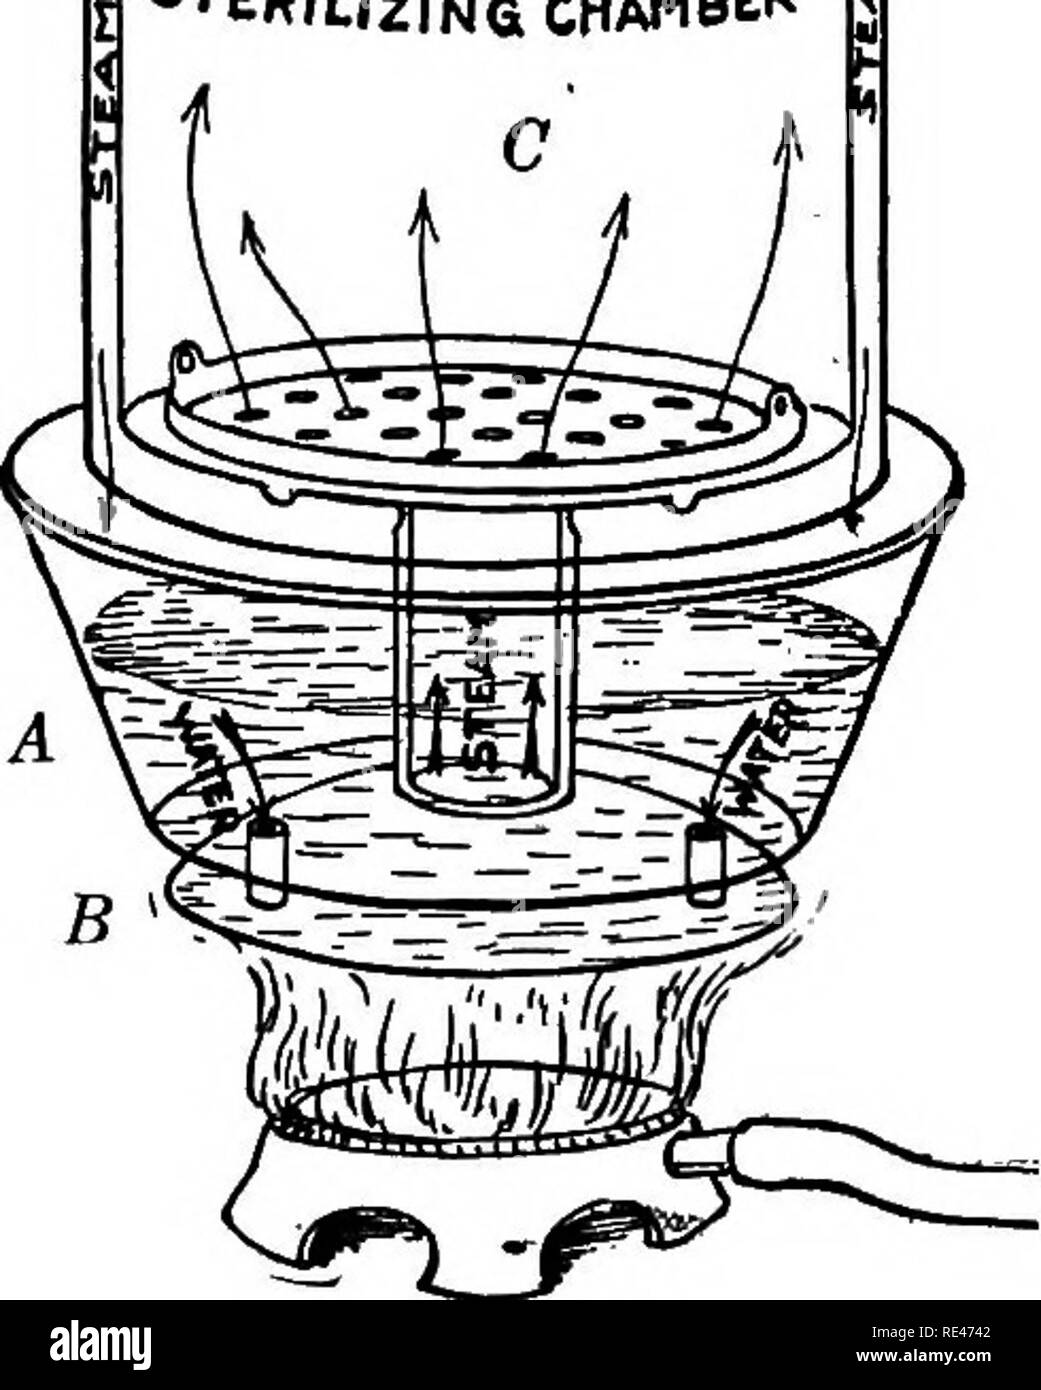 . A text-book of bacteriology; a practical treatise for students and practitioners of medicine. Bacteriology. 70 BIOLOGY AND TECHNIQUE STERILIZING CHAMBER c laboratory purposes, the original steaming device introduced by Koch has been almost completely displaced by devices constructed on the plan of the so-called &quot; Arnold &quot; sterilizer (Fig. 9). In such an appara- tus, water is poured into the reservoir A and flows from there into the shallow receptacle B, formed by the double bottom. The flame underneath rapidly vaporizes the thin layer of water contained in B, and the steam rises ra Stock Photo